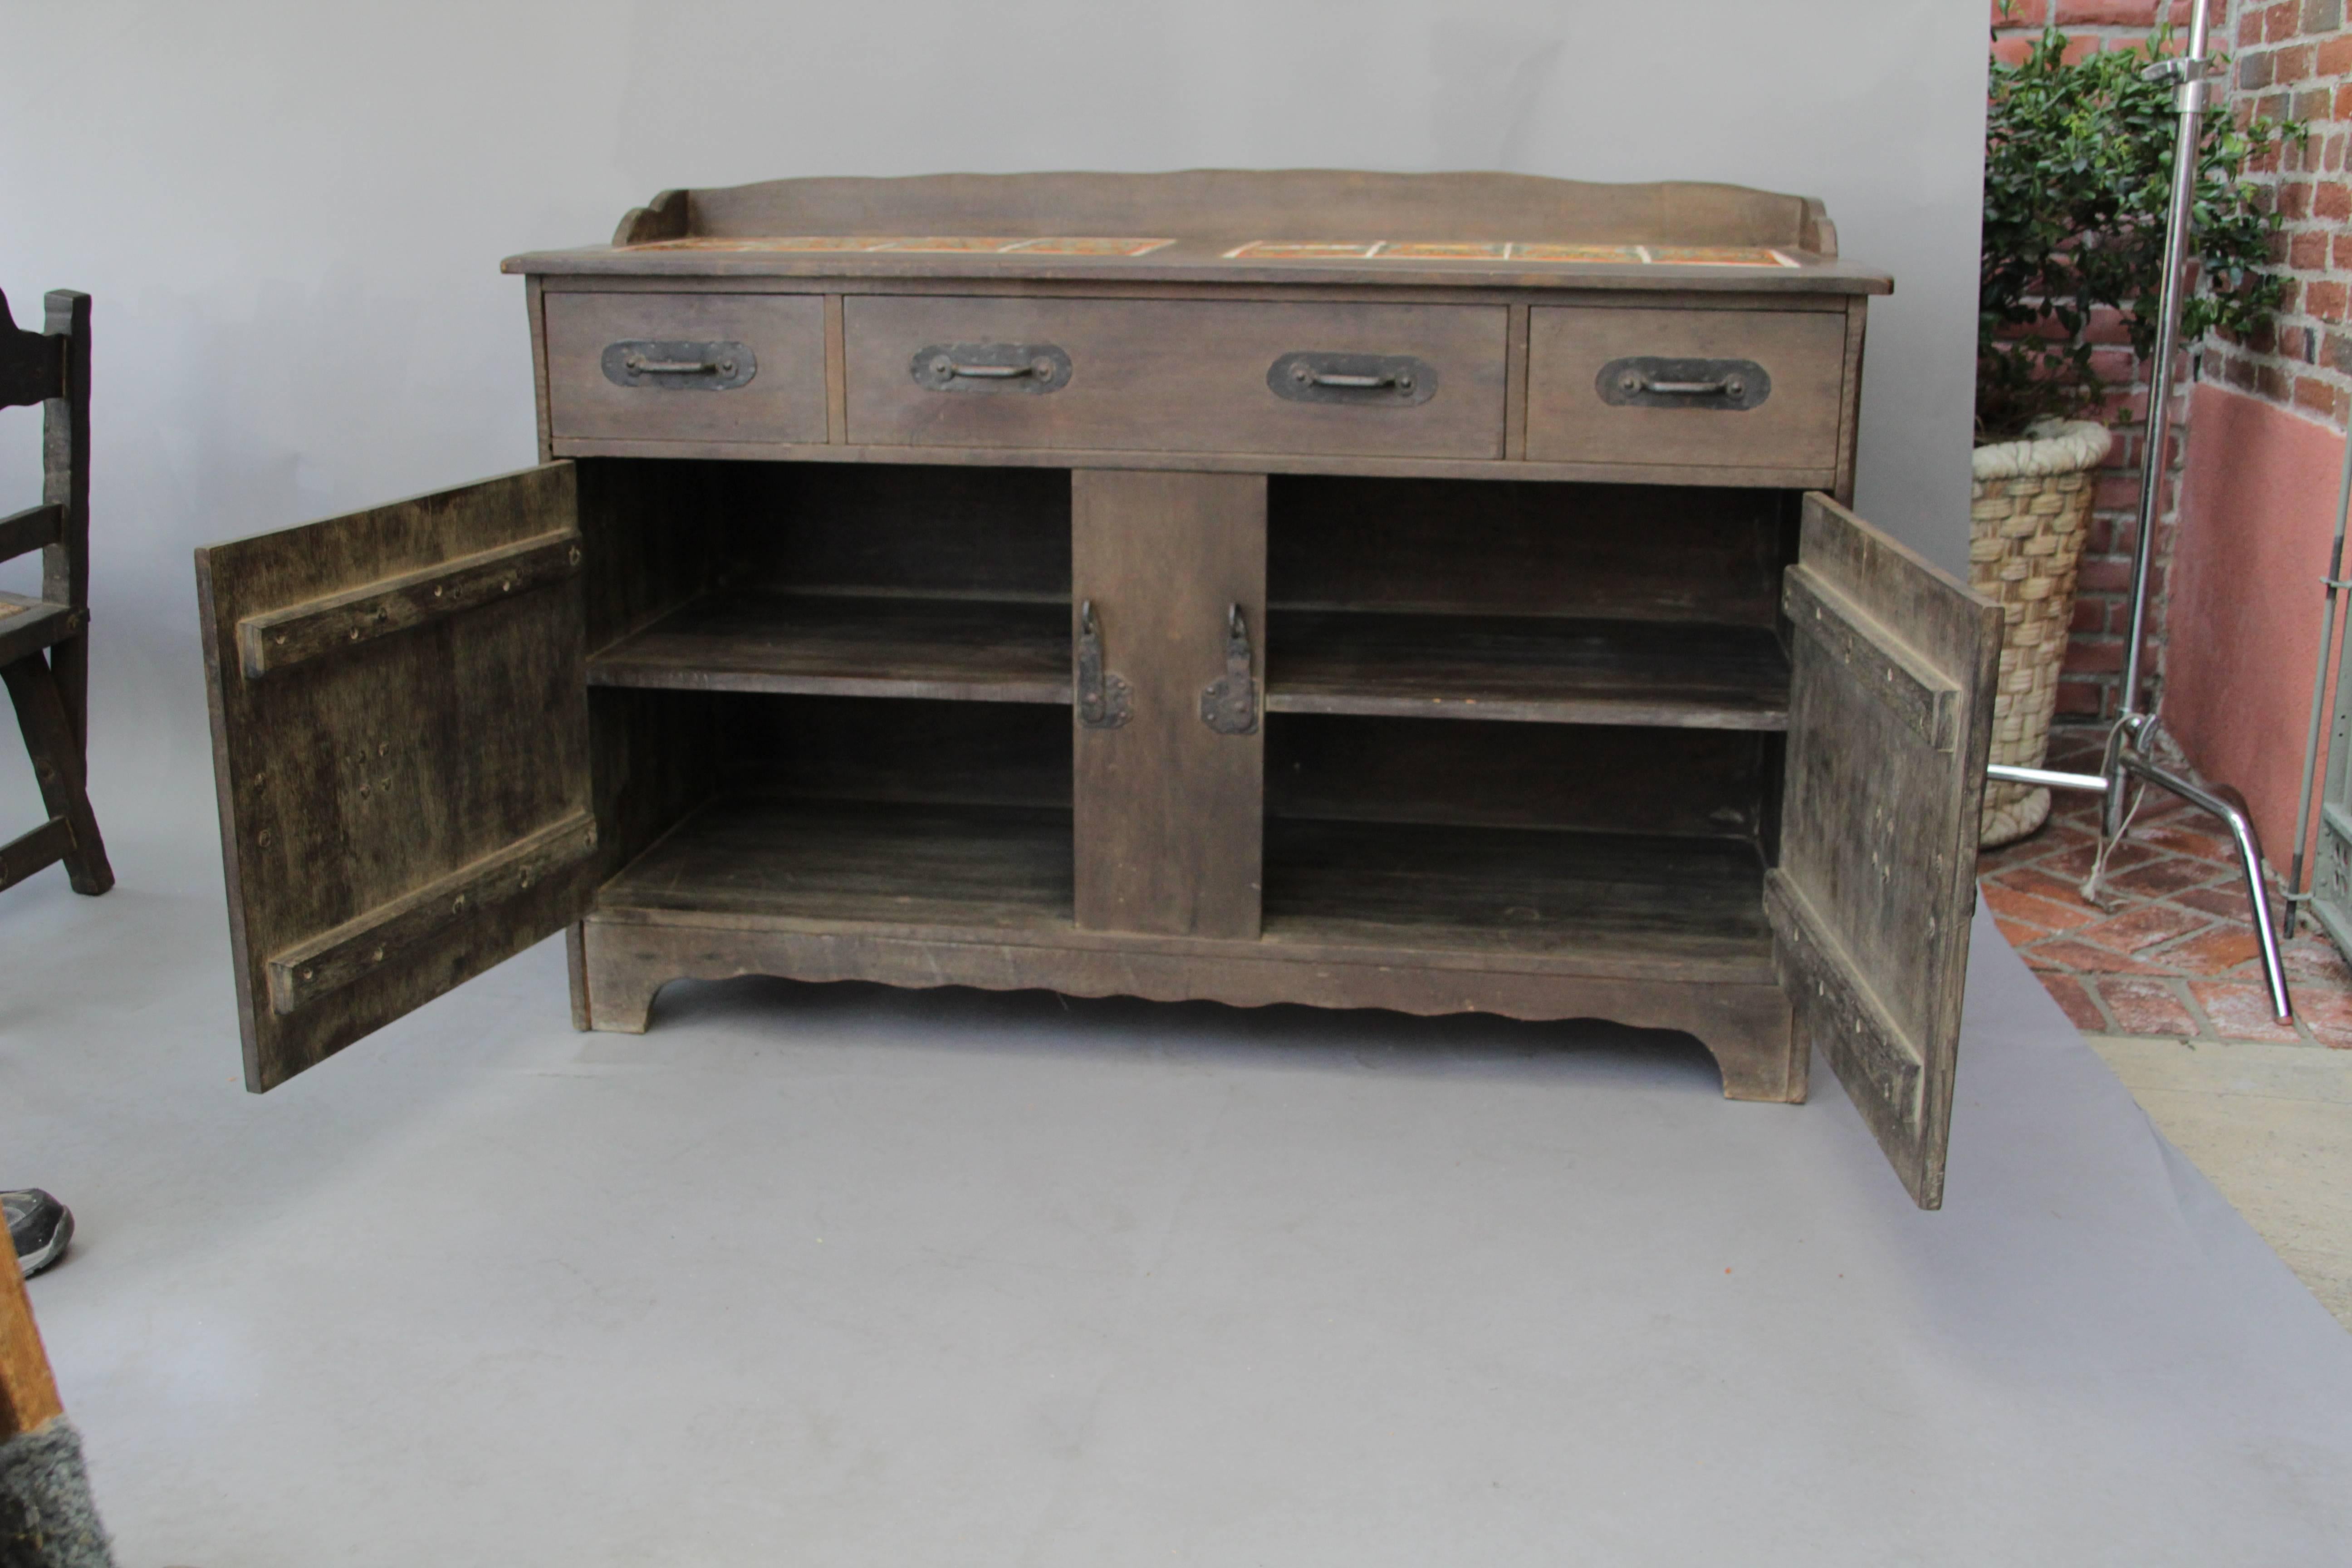 1930s Monterey 16 Tile-Top Sideboard Buffet in Original Old Wood Finish 1